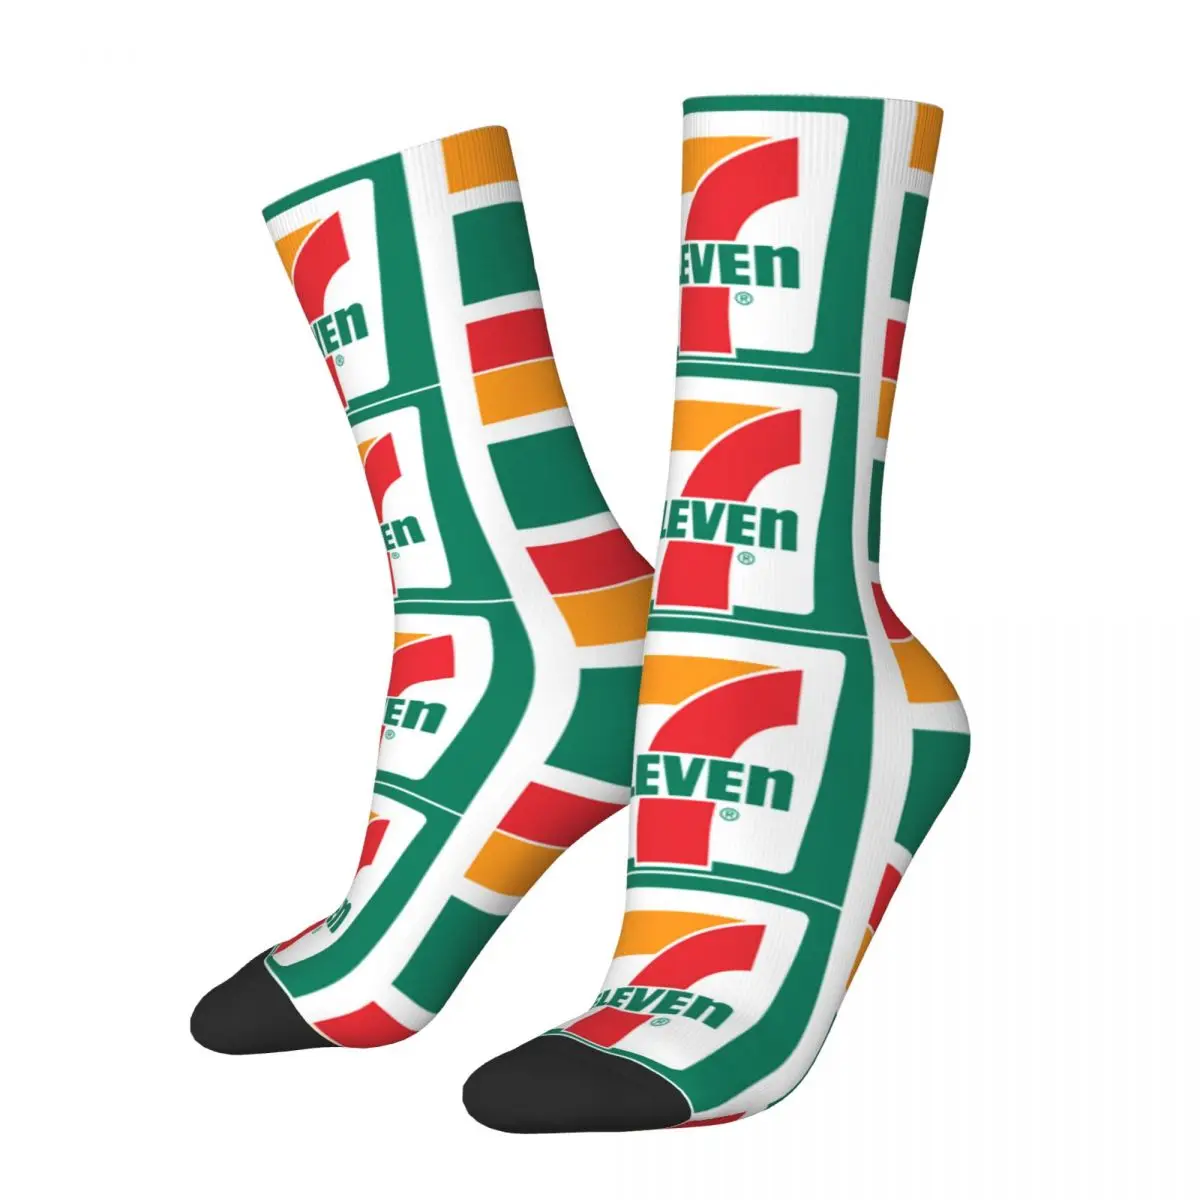 

711 7-11 7-Eleven Store Logo Product Socks Cozy High Quality Crew Sock Super Soft for Womens Present